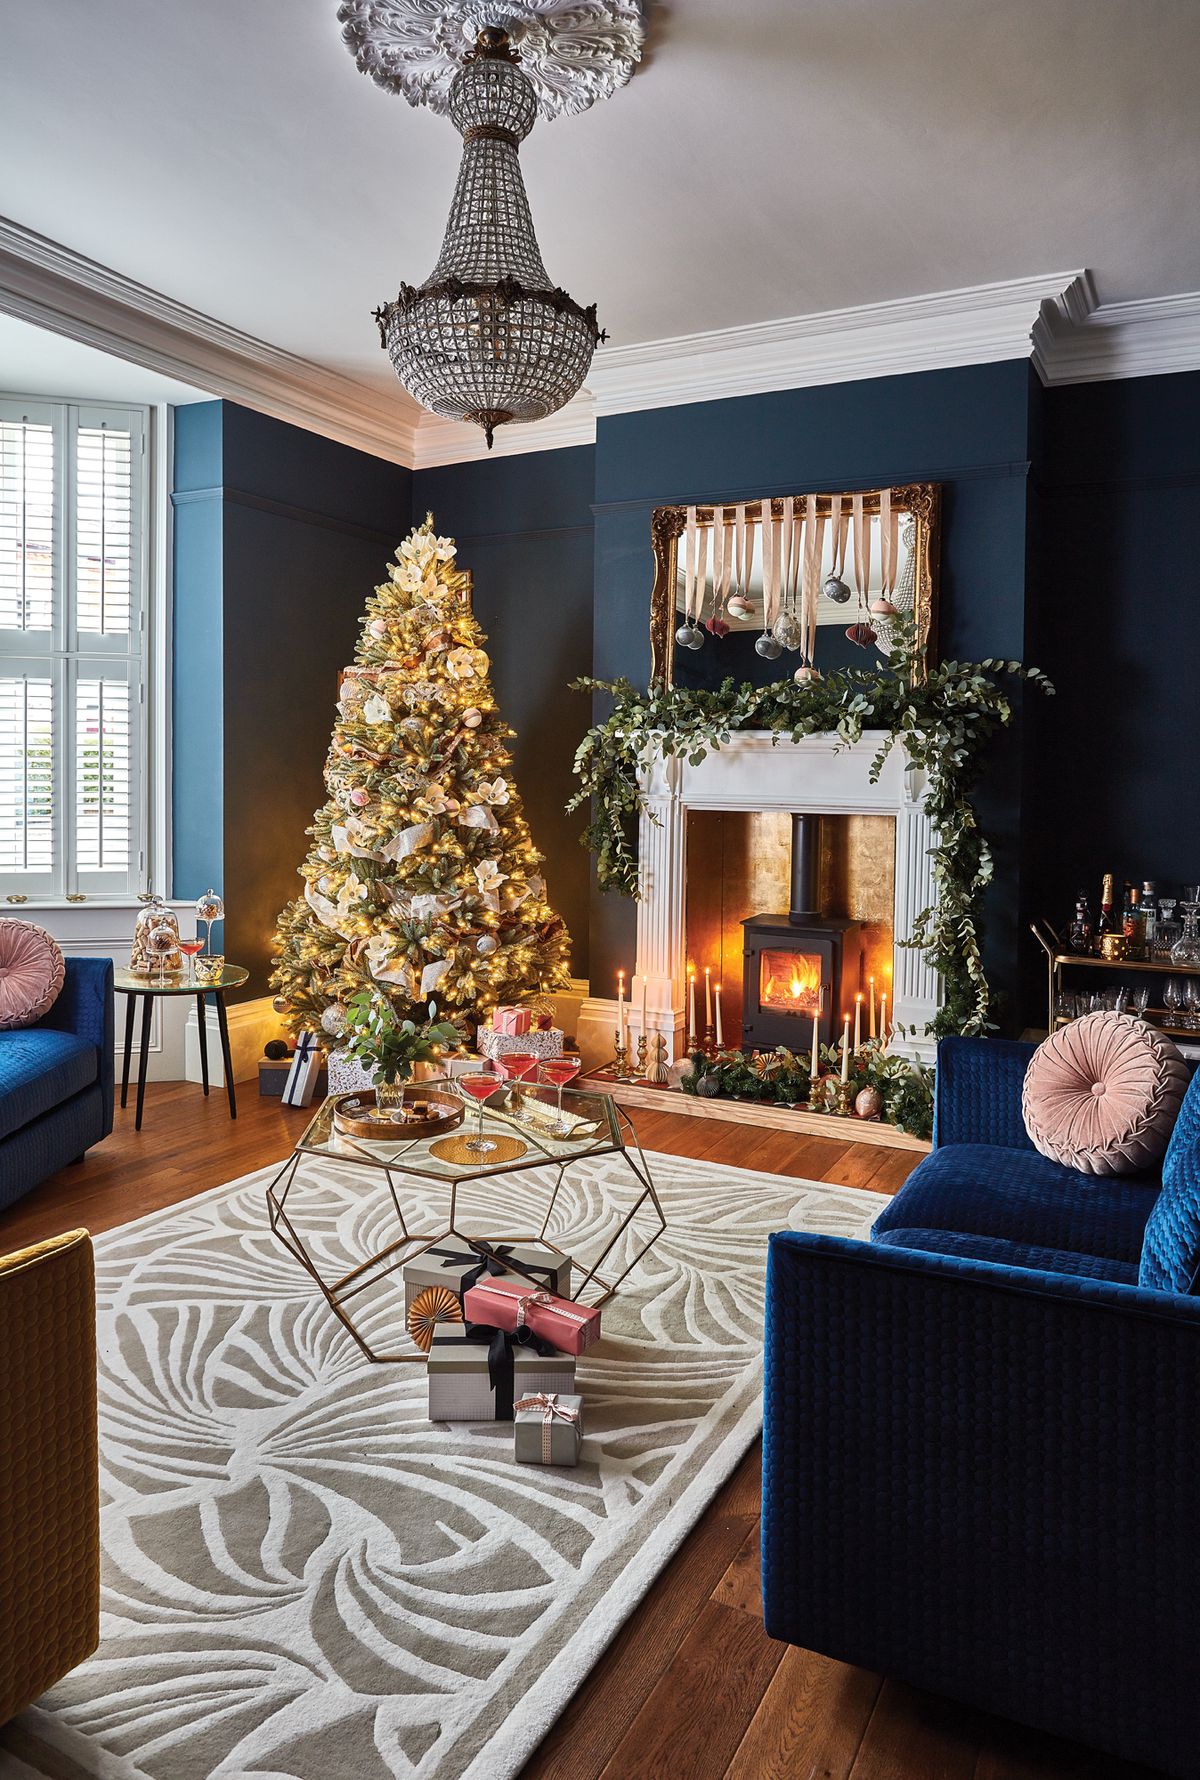 5 Christmas decor trends we're pinching from festive Instagrammers